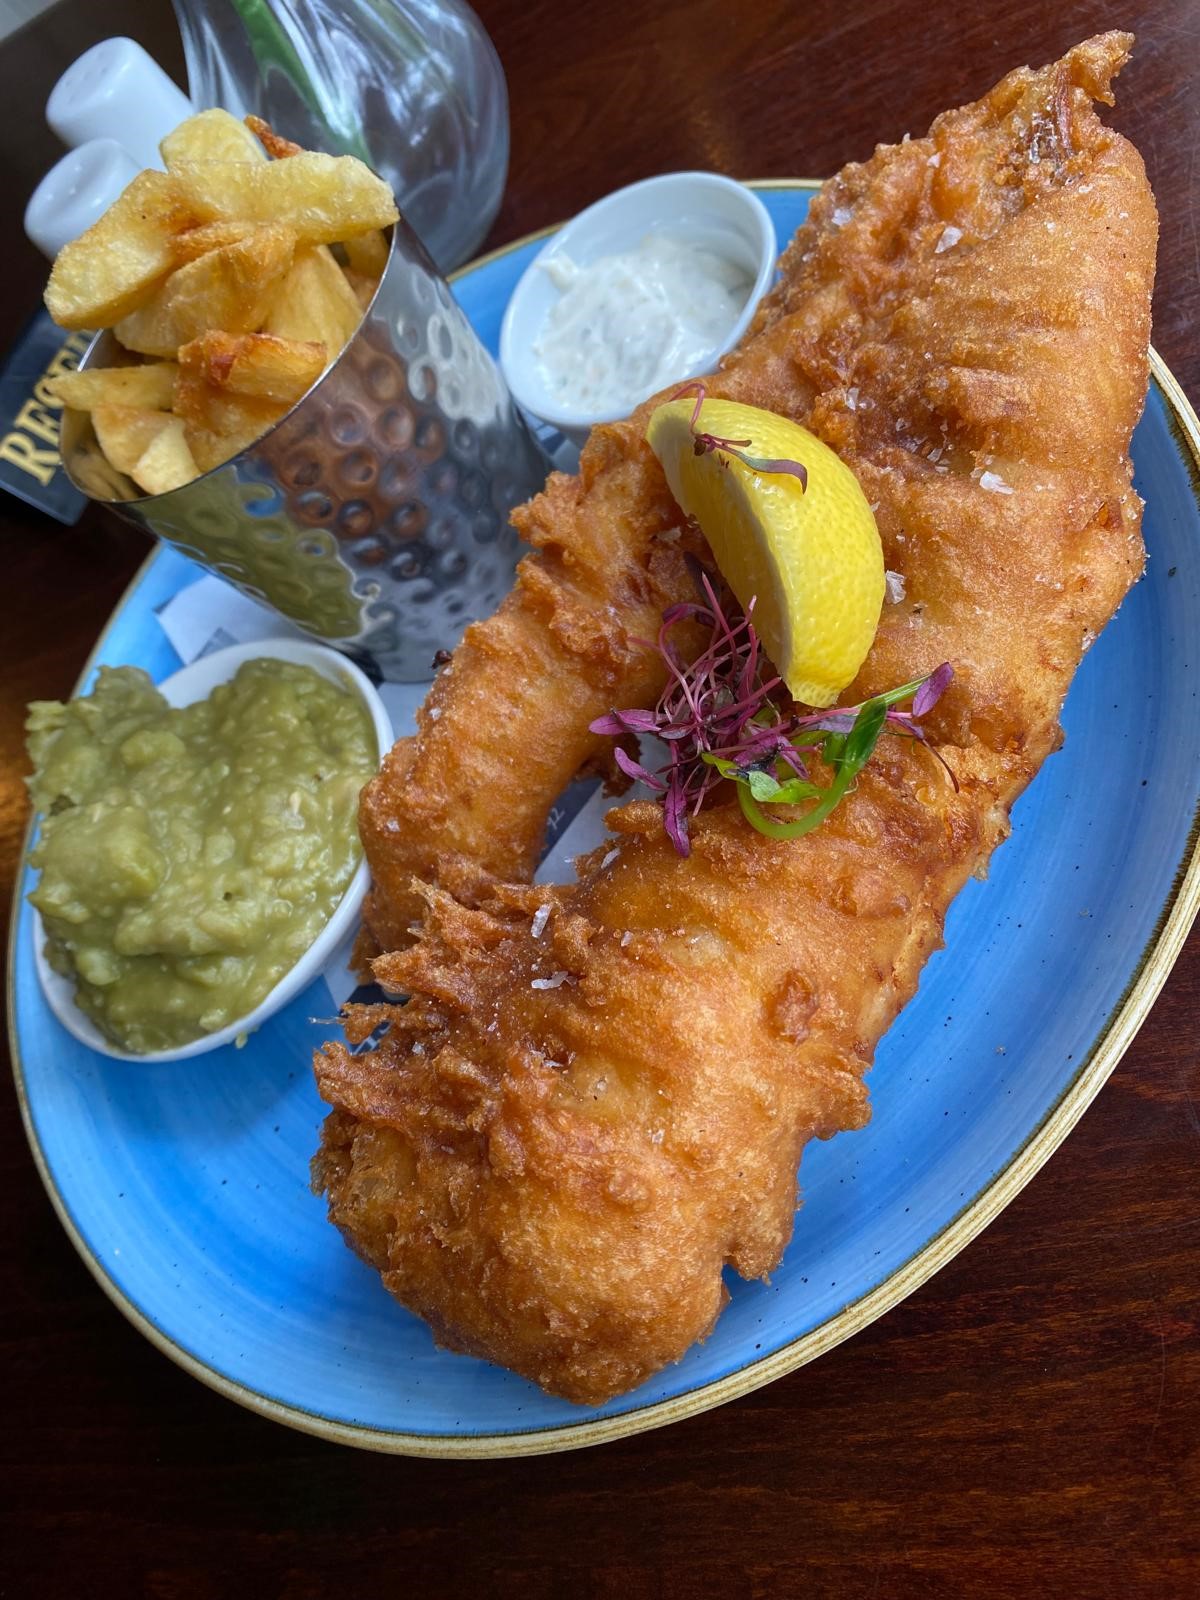 Large Haddock and Chips